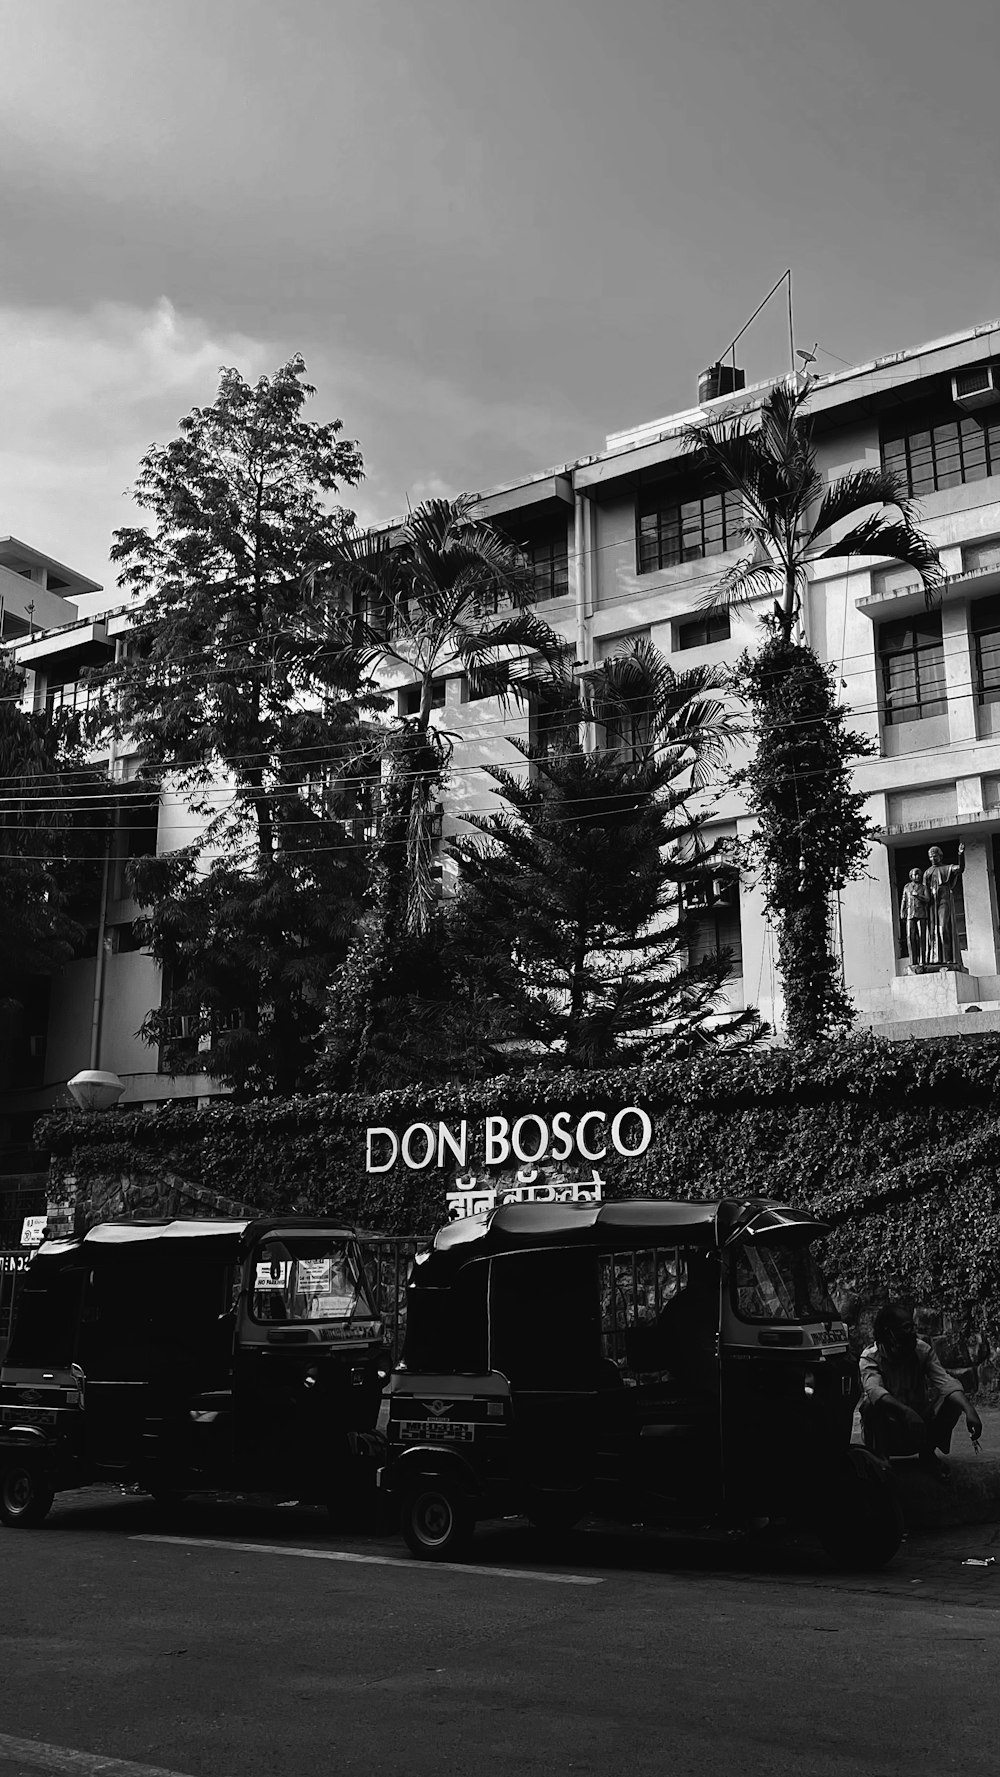 a black and white photo of a don bosco building